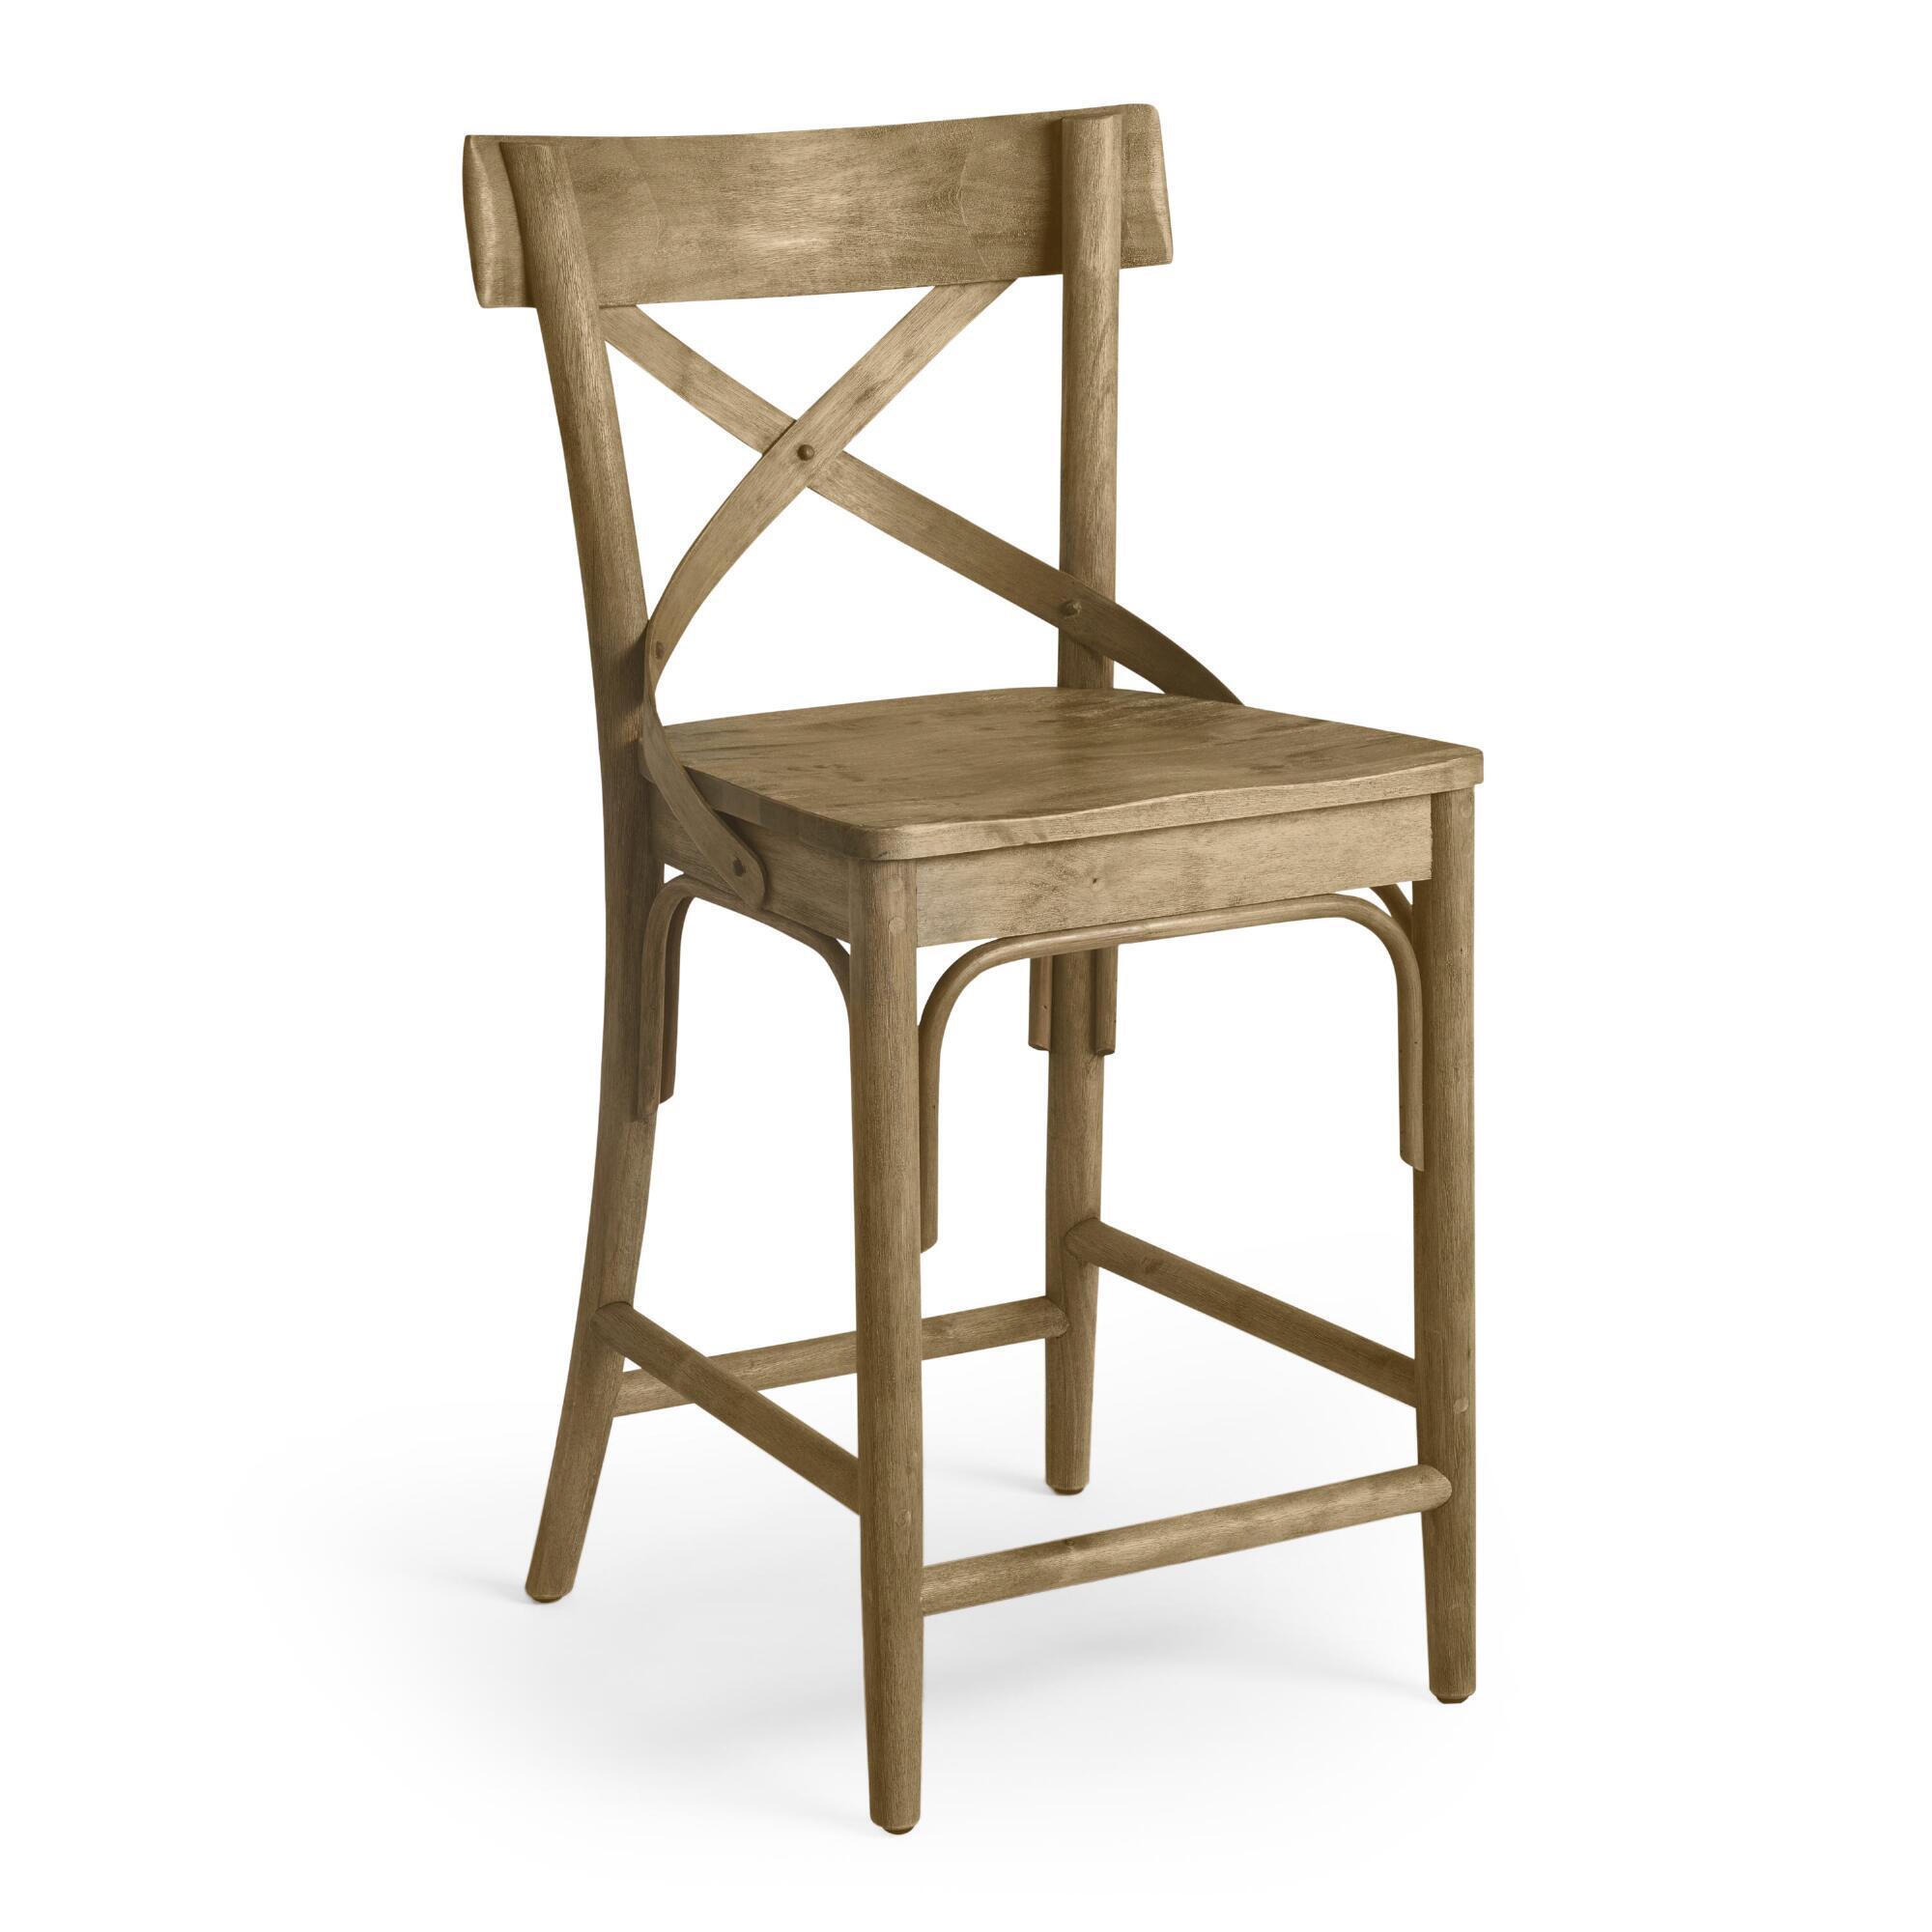 Distressed Wood Bistro Counter Stool: Brown by World Market